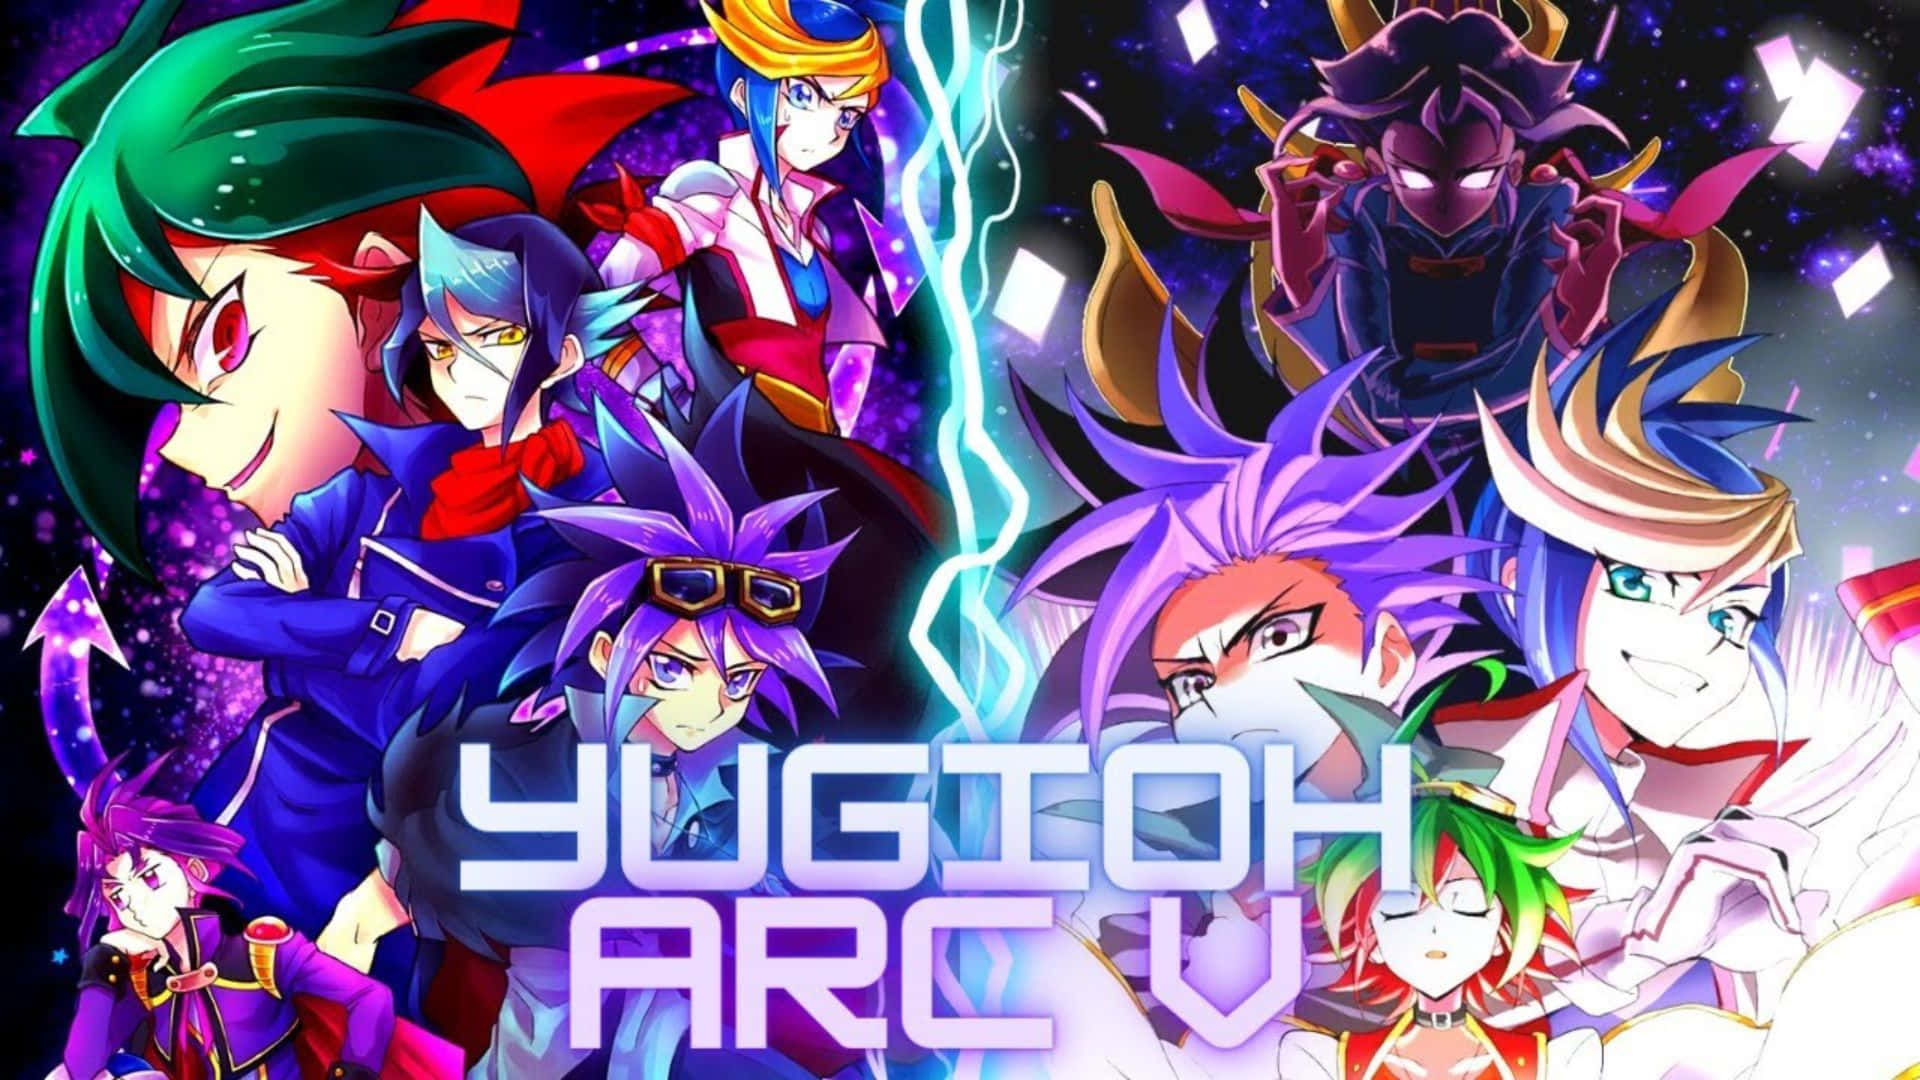 Yu-Gi-Oh! Yugo riding his signature Duel Runner Synchro Dimension's Clear Wing Synchro Dragon Wallpaper